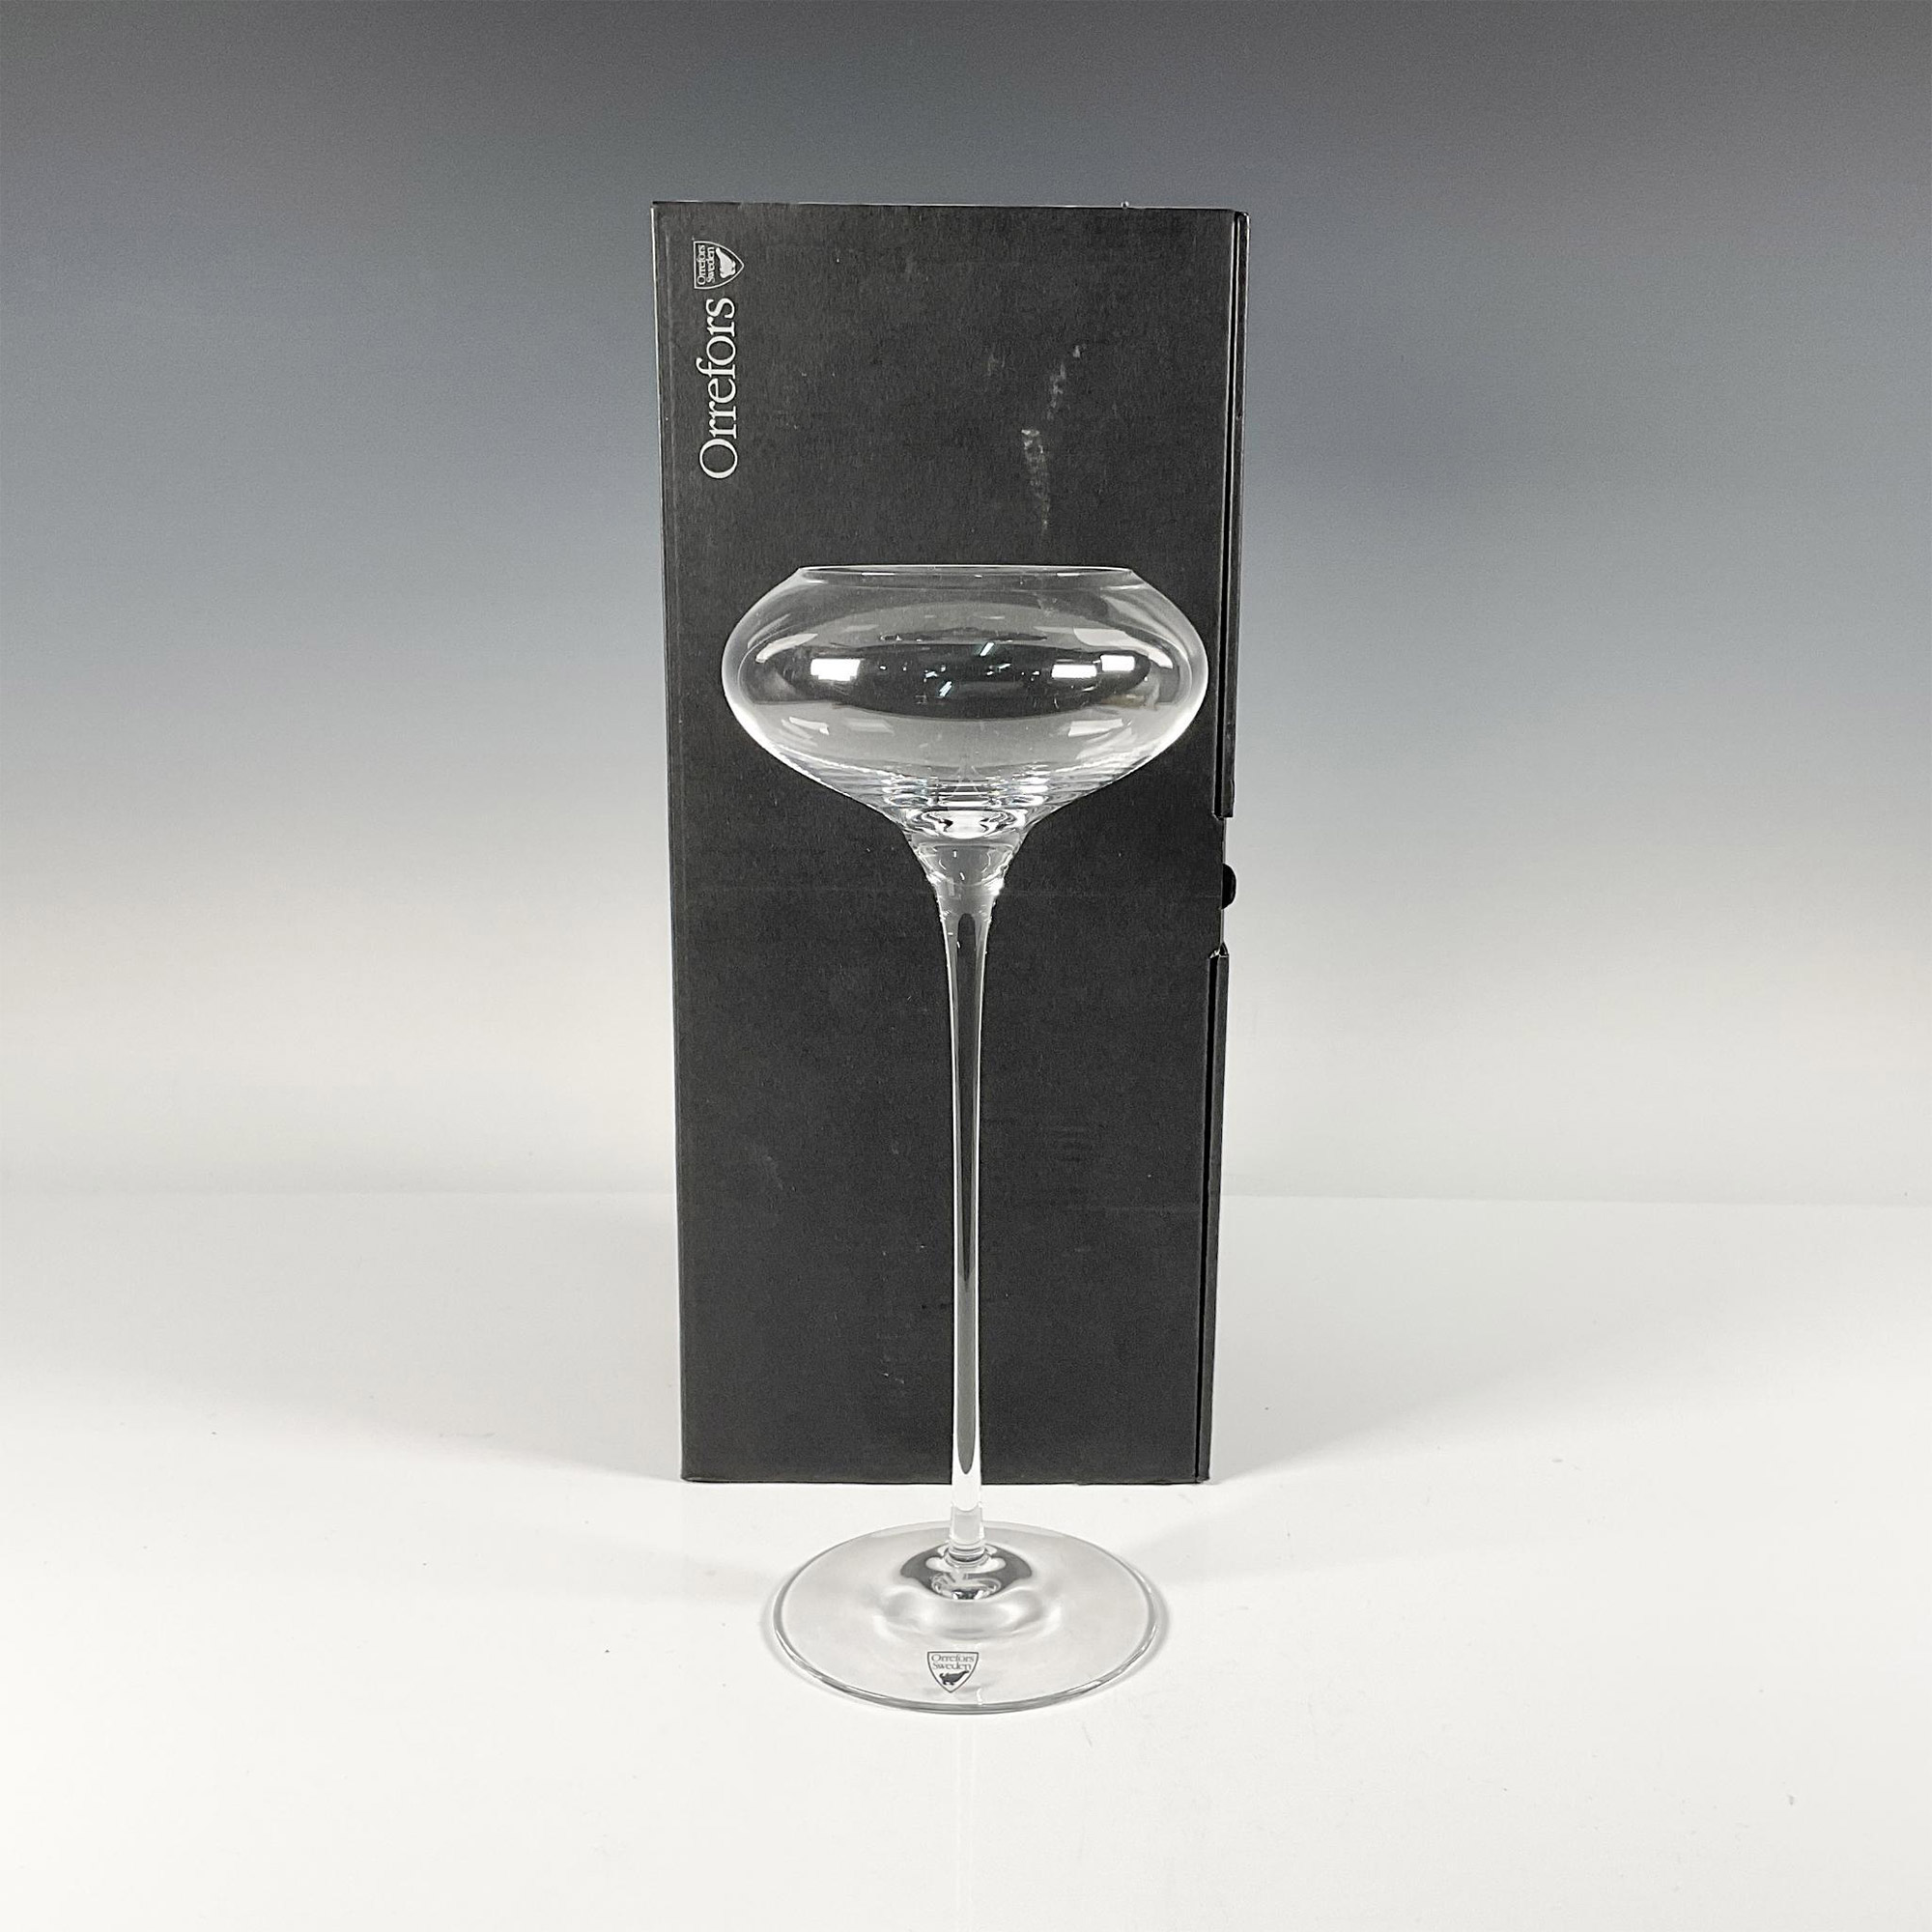 Orrefors Crystal Cordial Glass, Ceremony Clear - Image 3 of 3